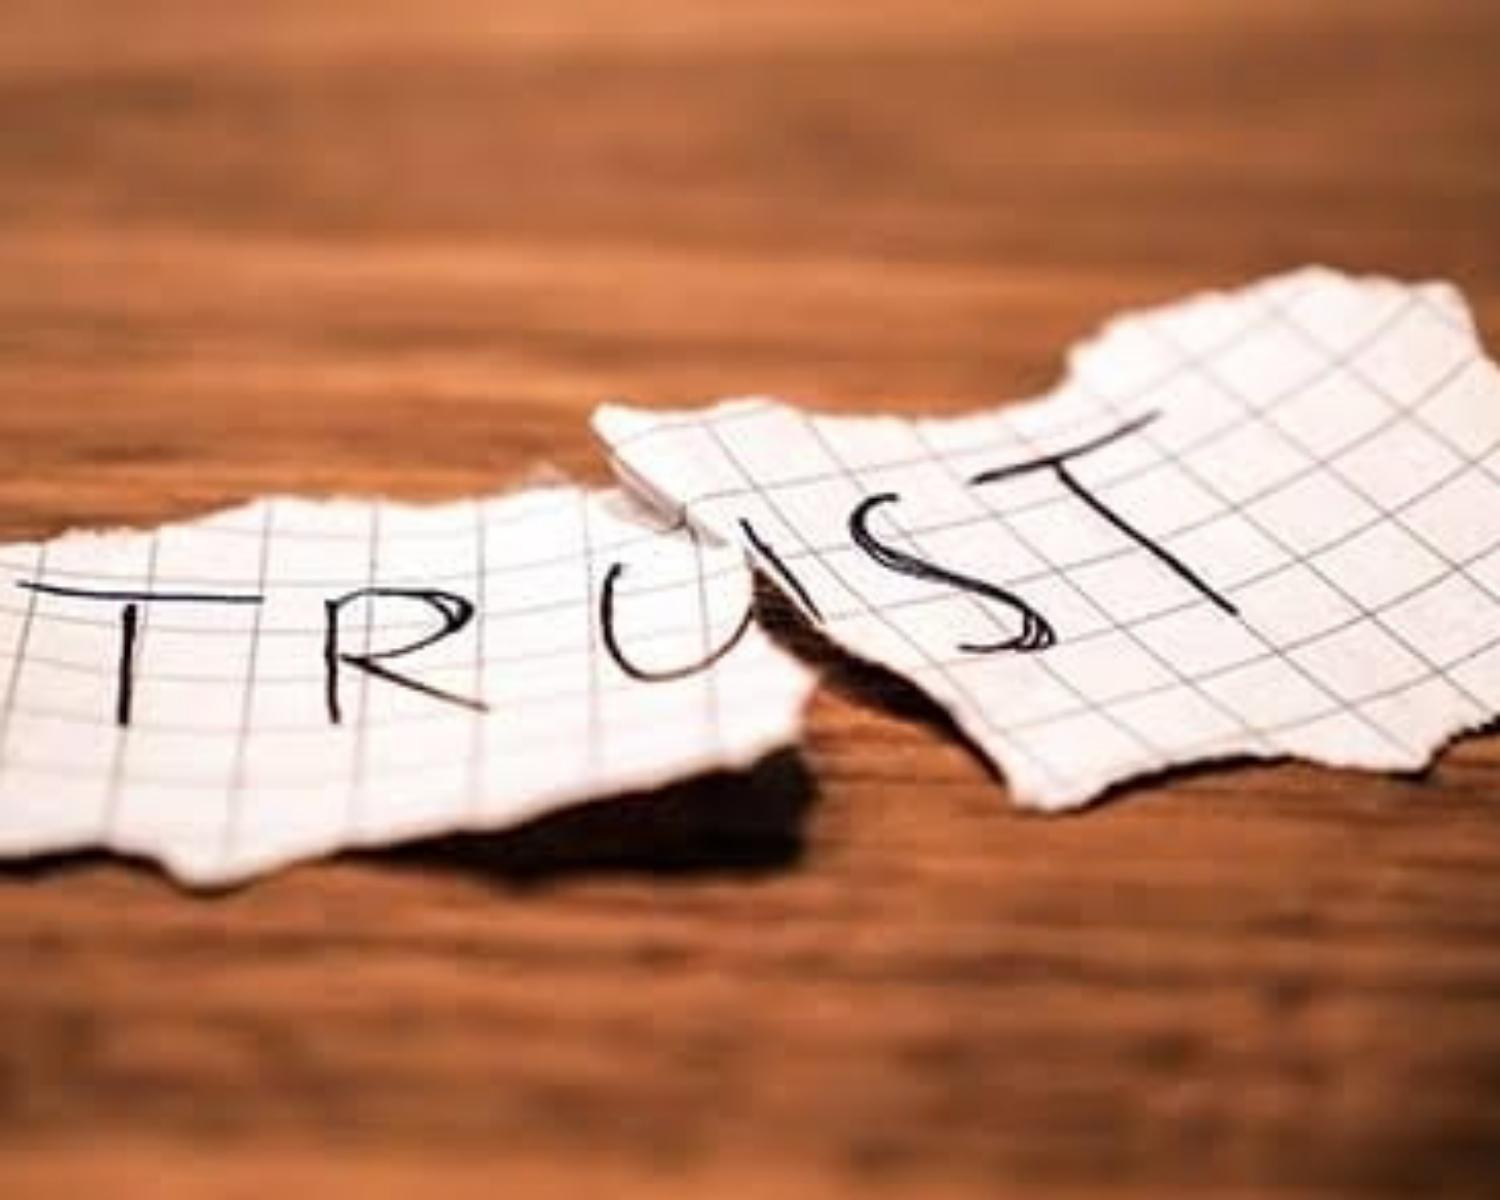 The time to trust your gut is when you have the knowledge or experience to back it up.